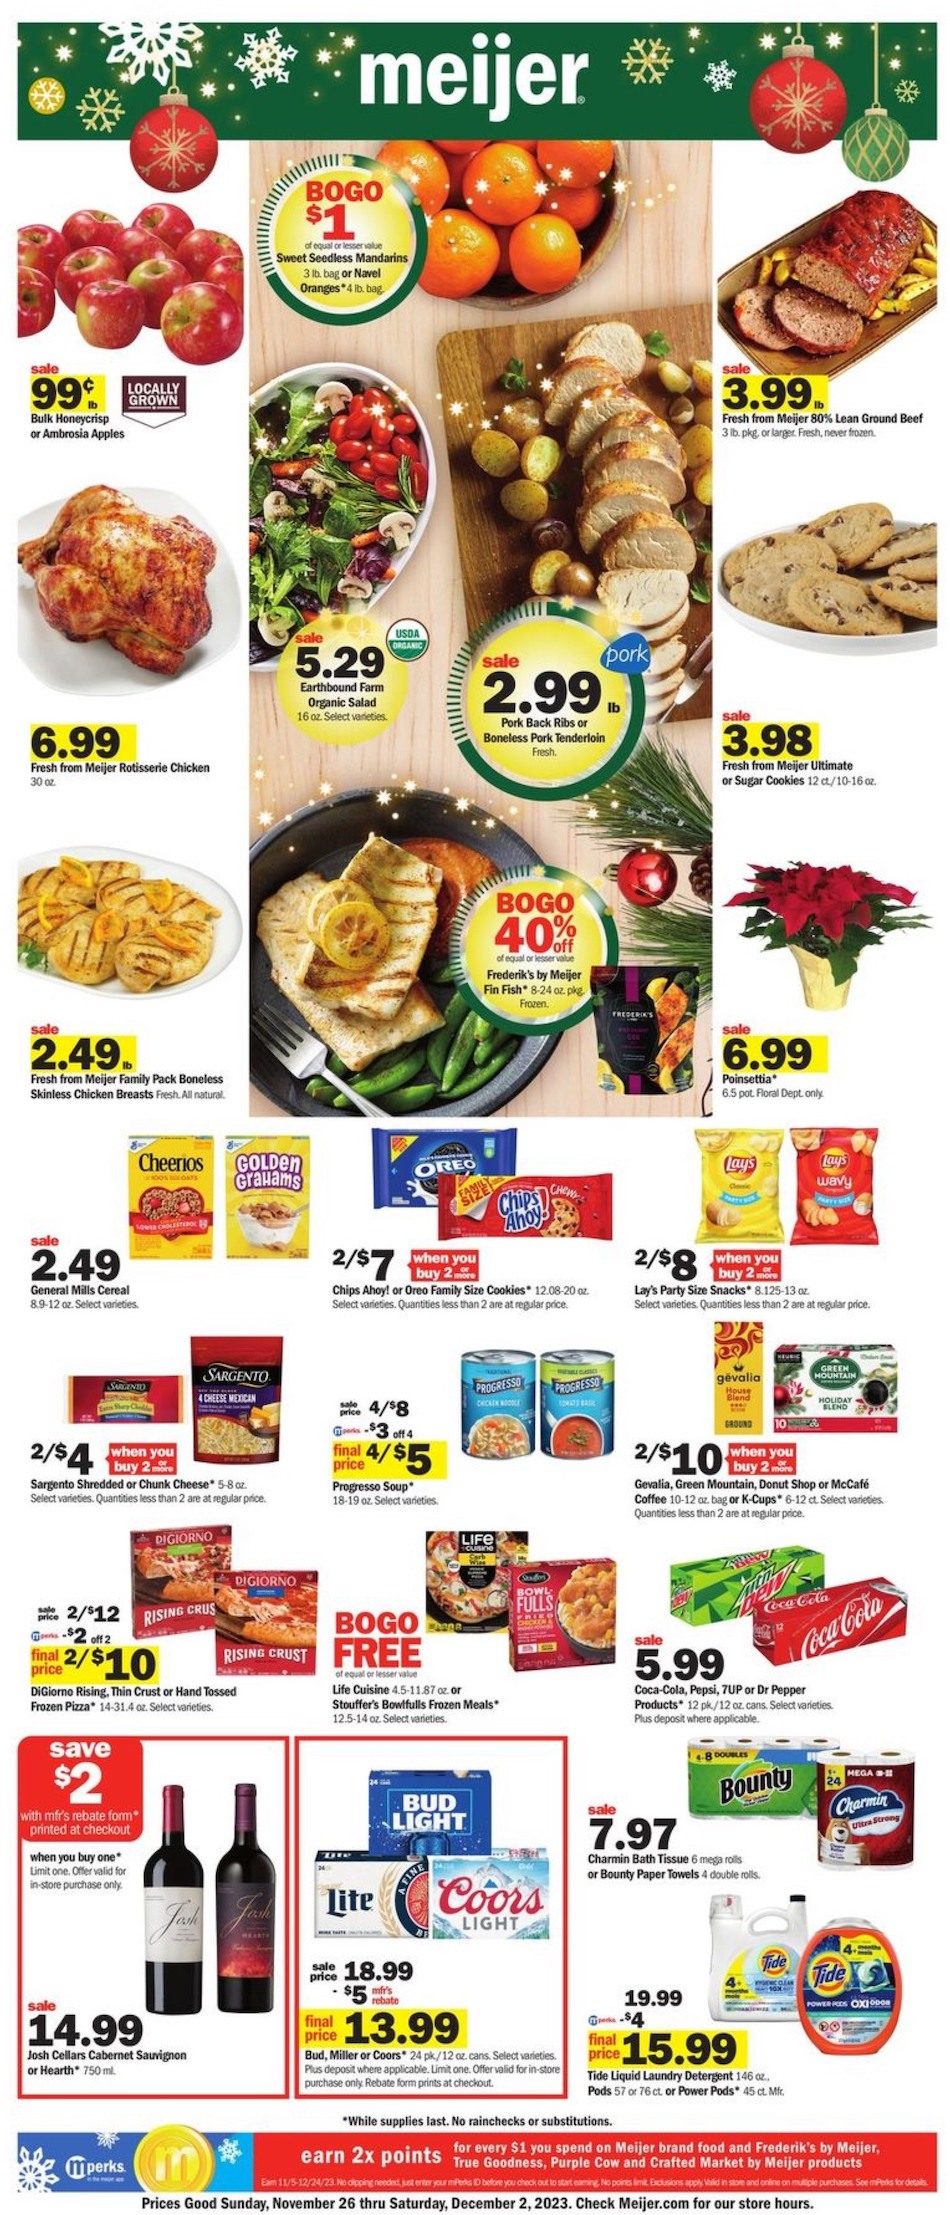 Meijer Weekly Ad 26th November – 2nd December 2023 Page 1